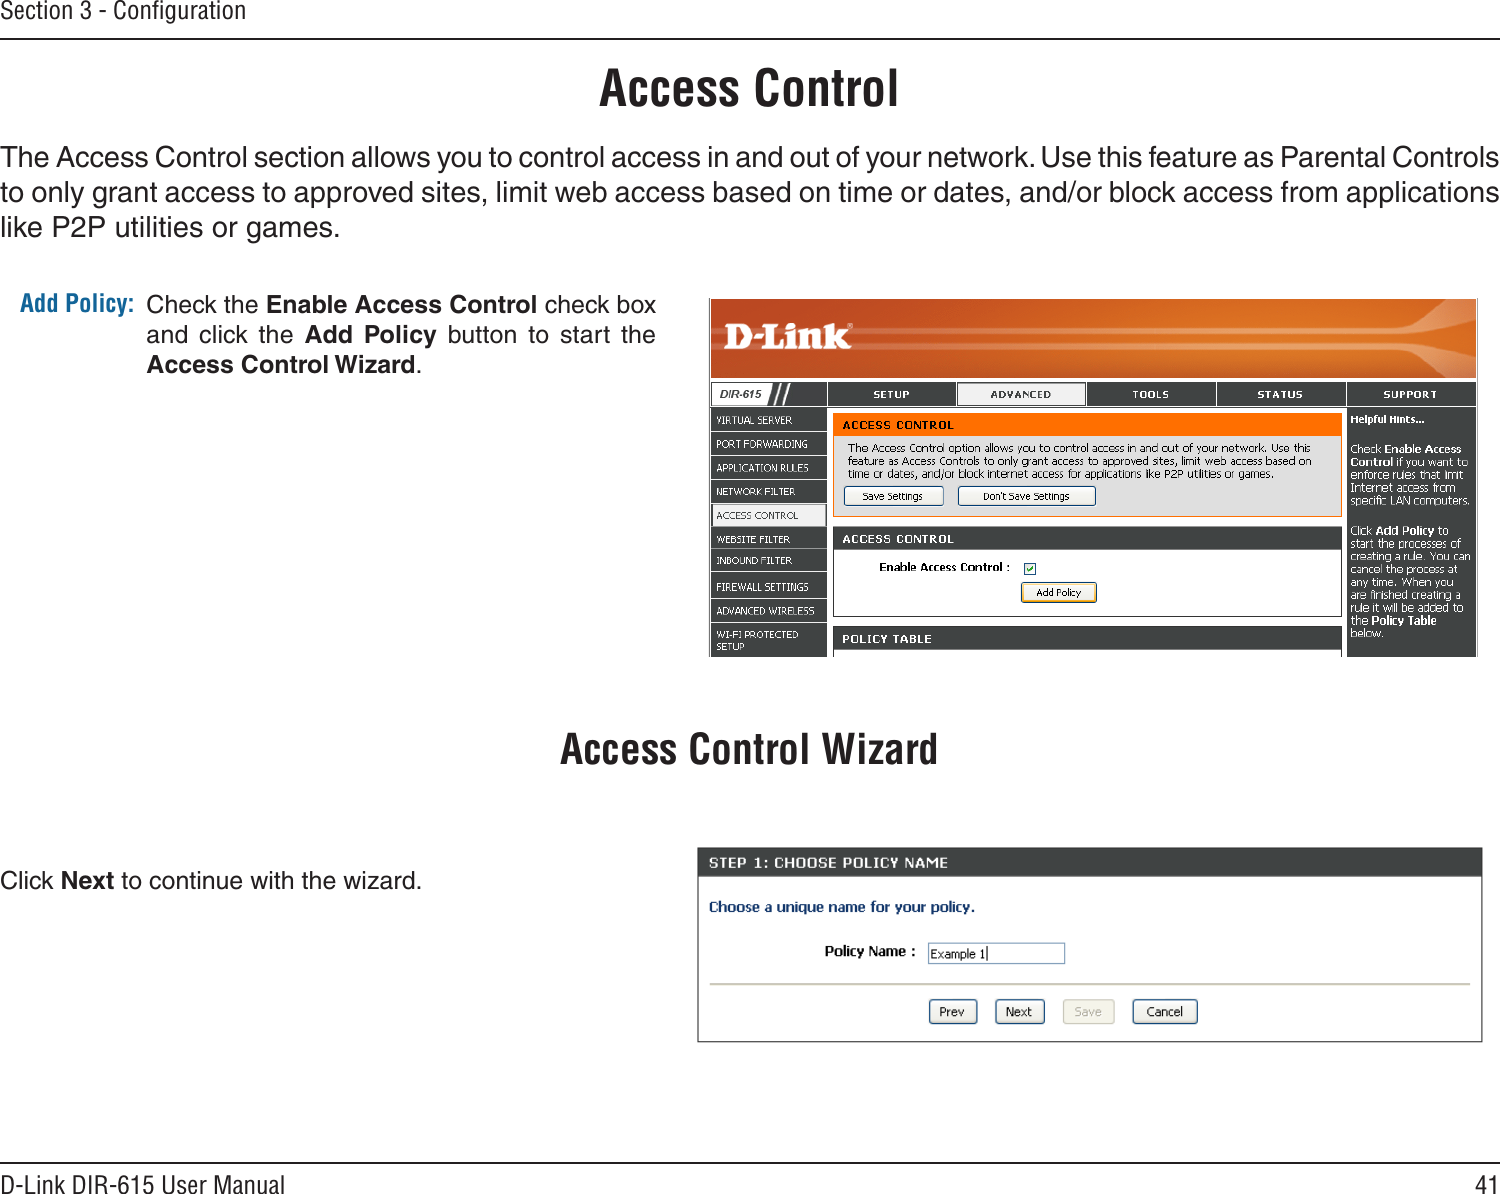 41D-Link DIR-615 User ManualSection 3 - ConﬁgurationAccess ControlCheck the Enable Access Control check box and  click  the  Add  Policy  button  to  start  the Access Control Wizard. Add Policy:The Access Control section allows you to control access in and out of your network. Use this feature as Parental Controls to only grant access to approved sites, limit web access based on time or dates, and/or block access from applications like P2P utilities or games.Click Next to continue with the wizard.Access Control Wizard